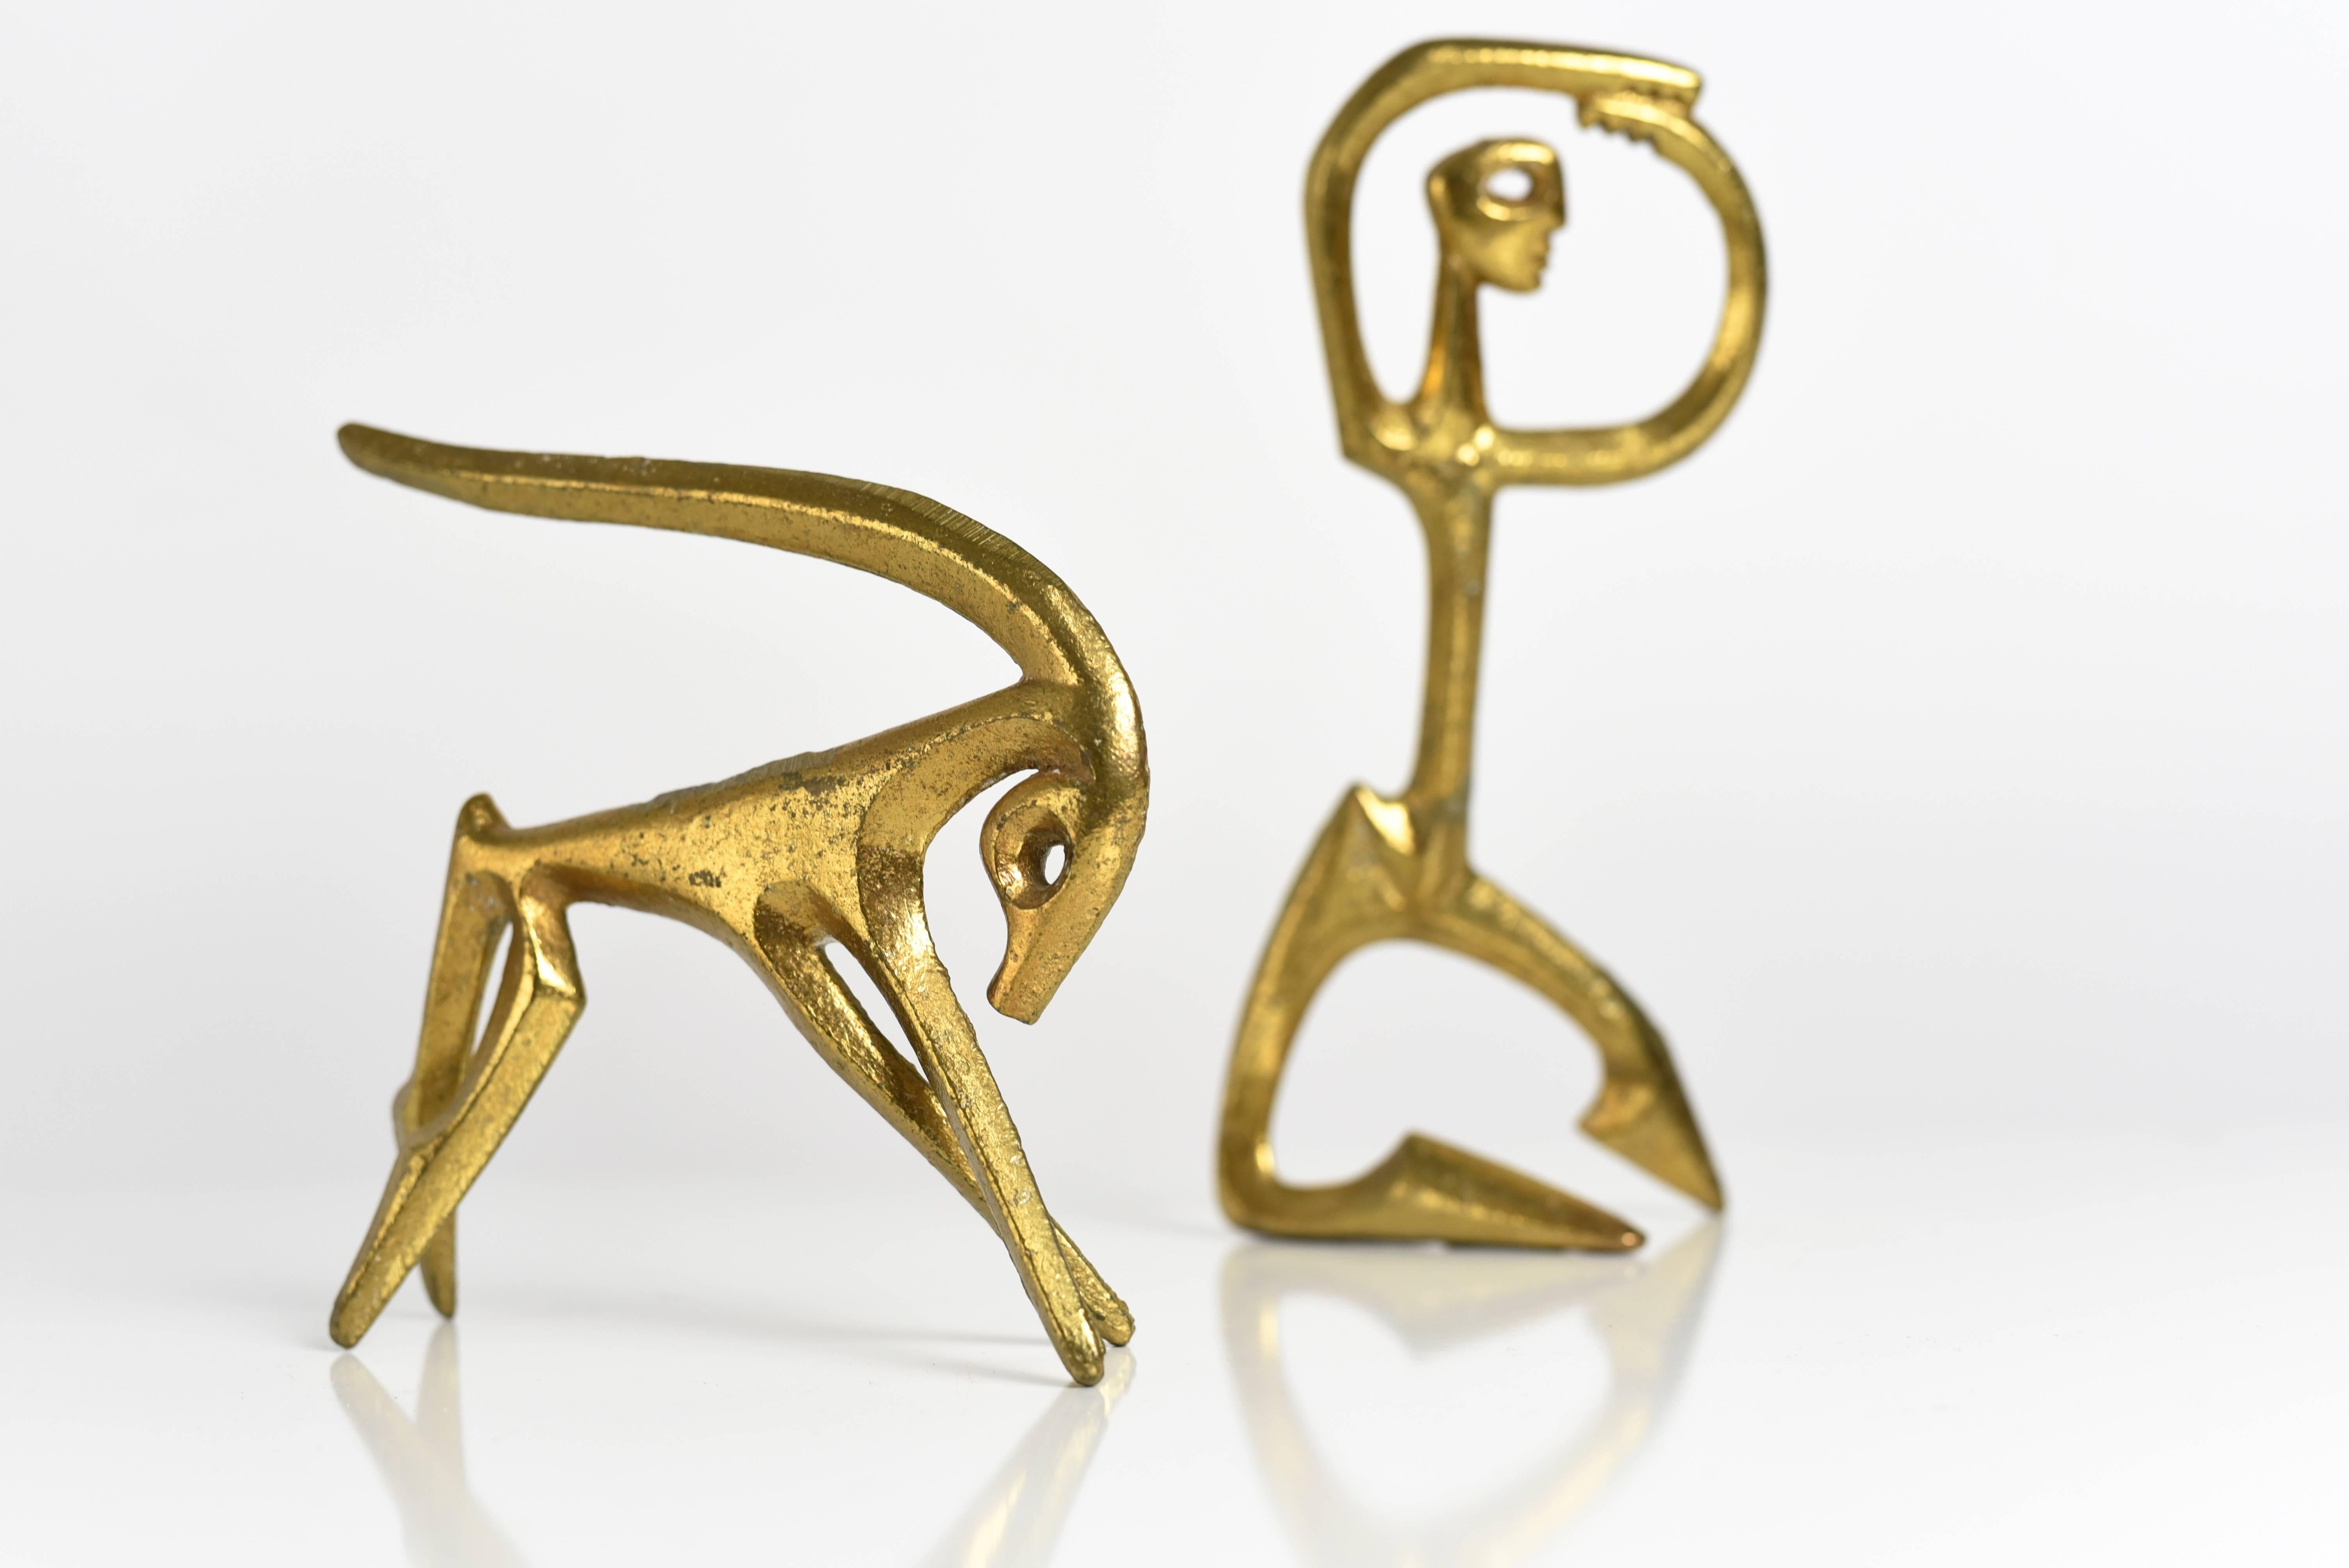 Pair of Frederic Weinberg sculptures

USA, 1950s

Gilded bronze

Gazelle 6 x 2 x 6 in
Man 4 x 3 x 8.5 in.